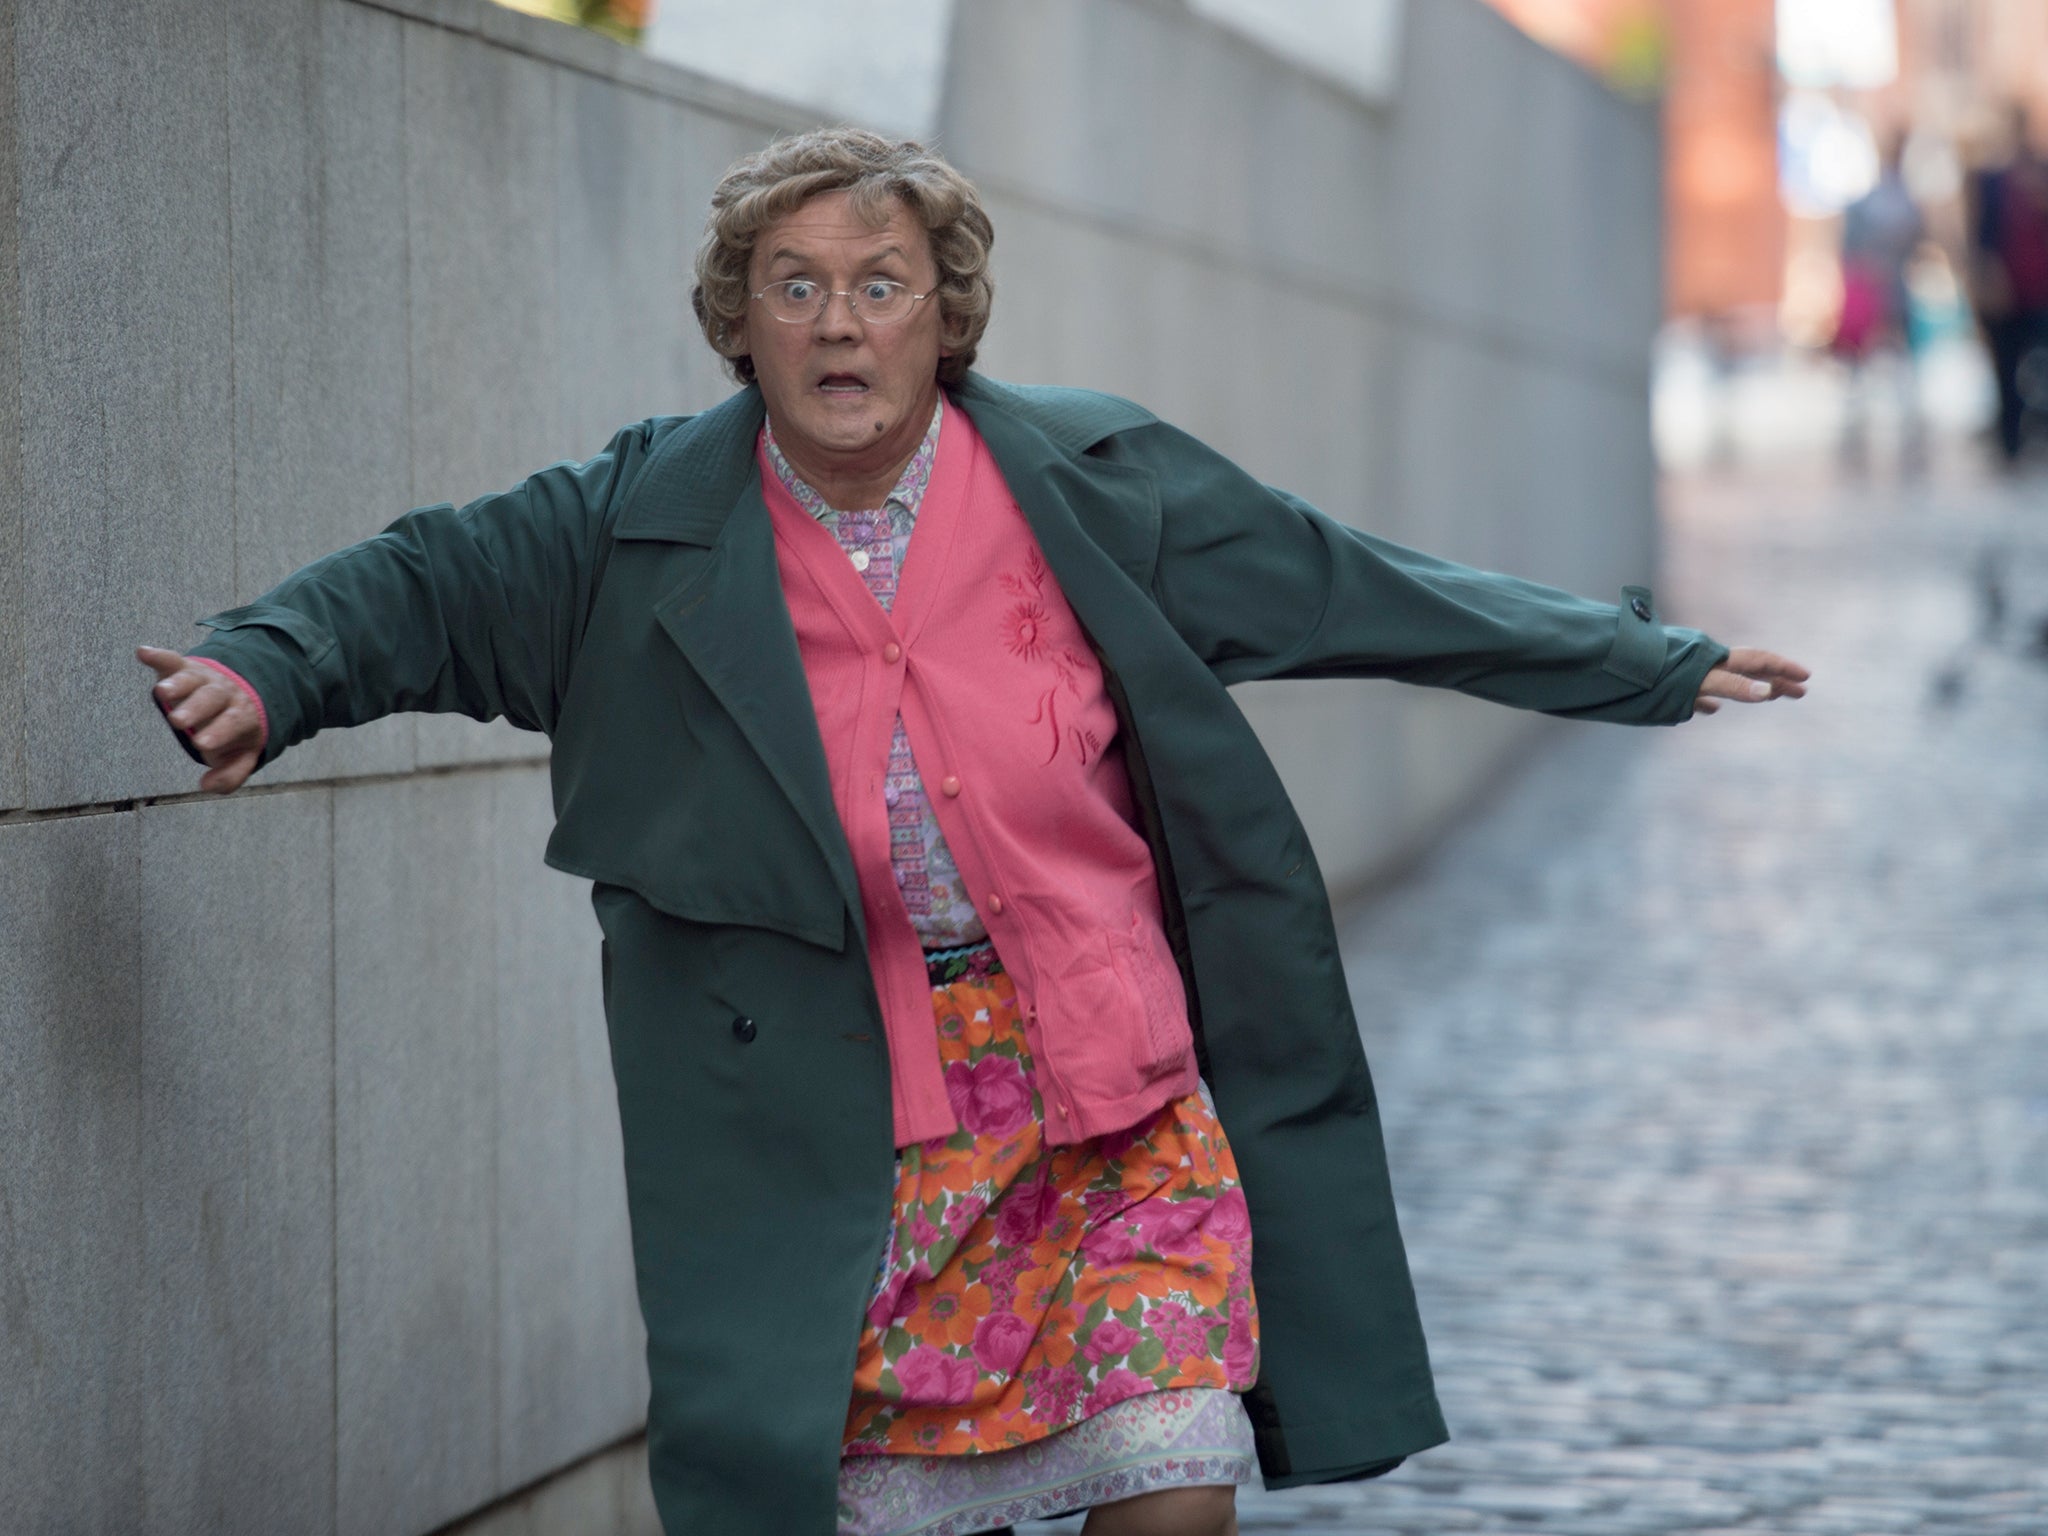 Brendan O'Carroll has brought out his female alter-ego Agnes Brown for Mrs Brown's Boys D'Movie